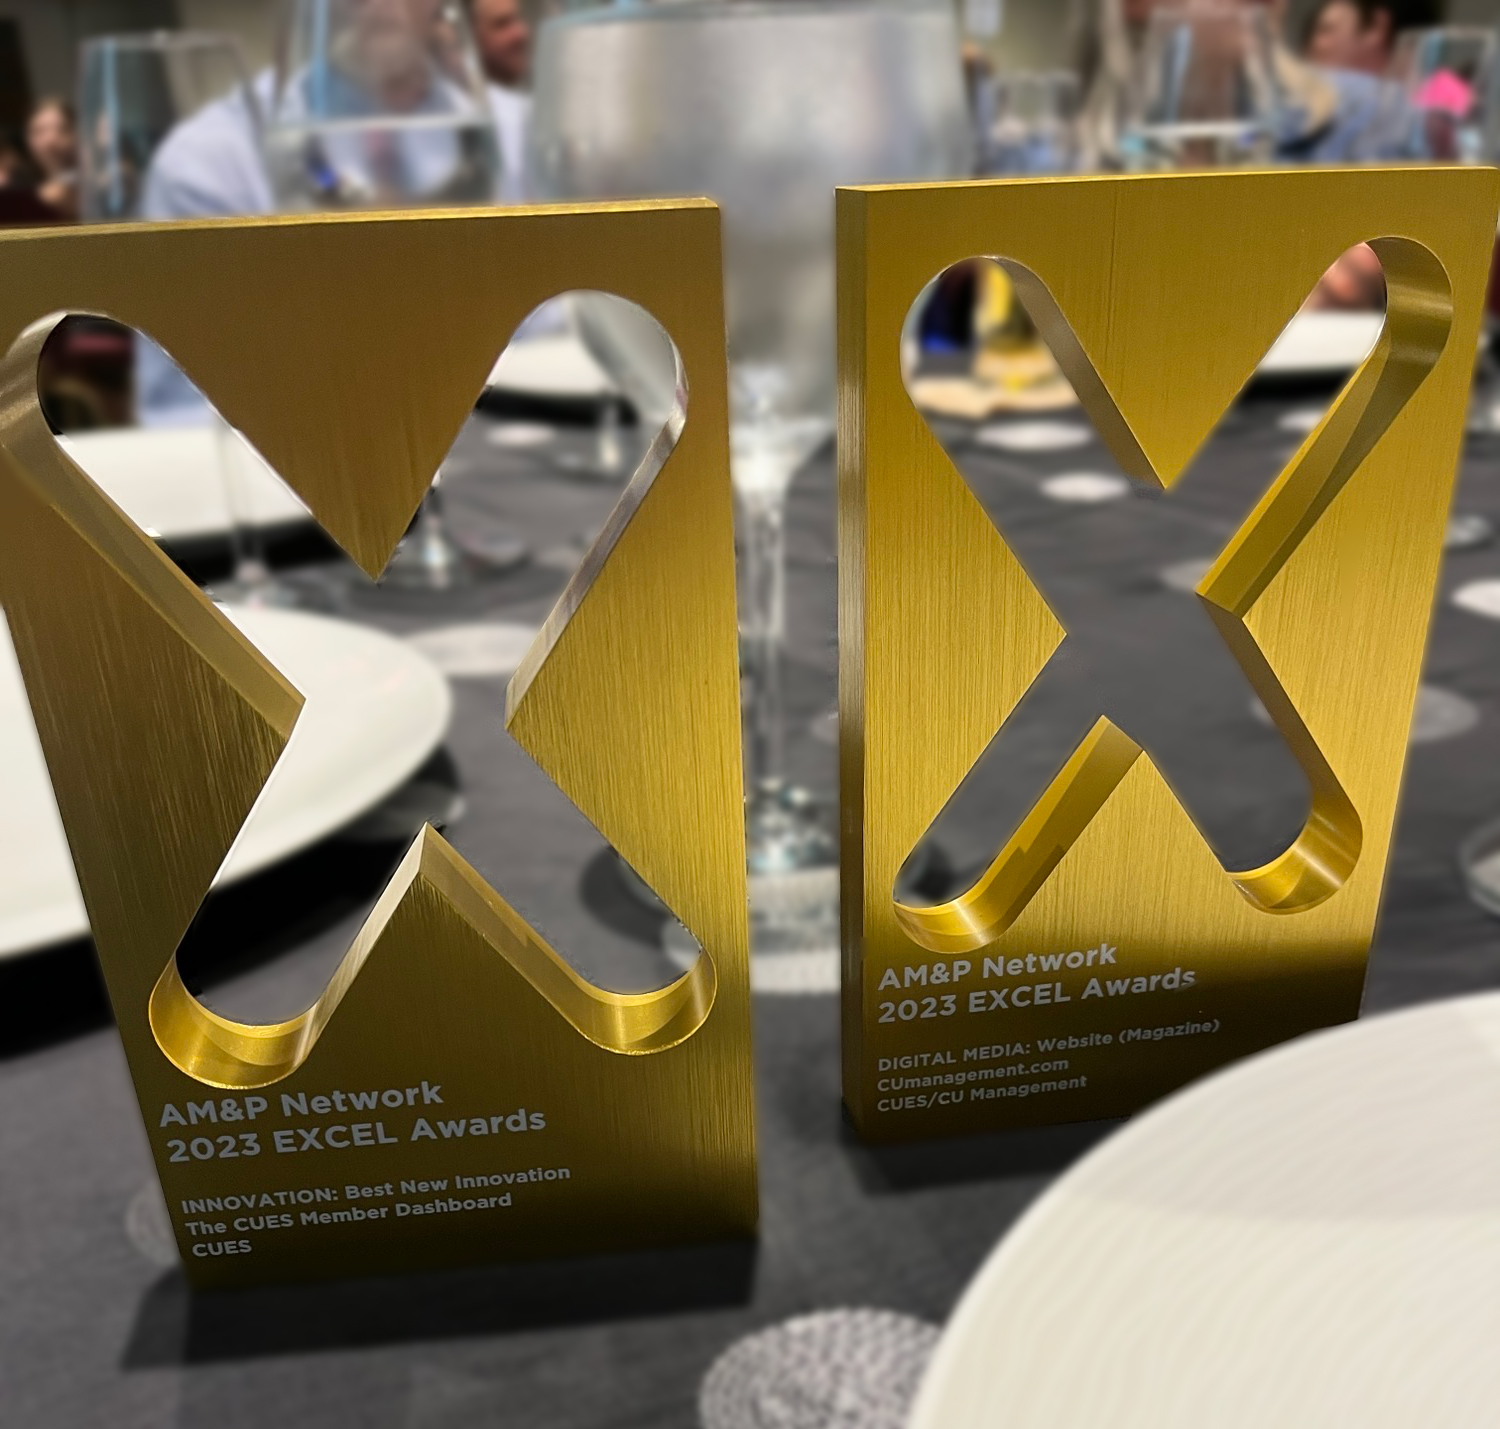 cues takes home gold at AM&P Network EXCEL Awards